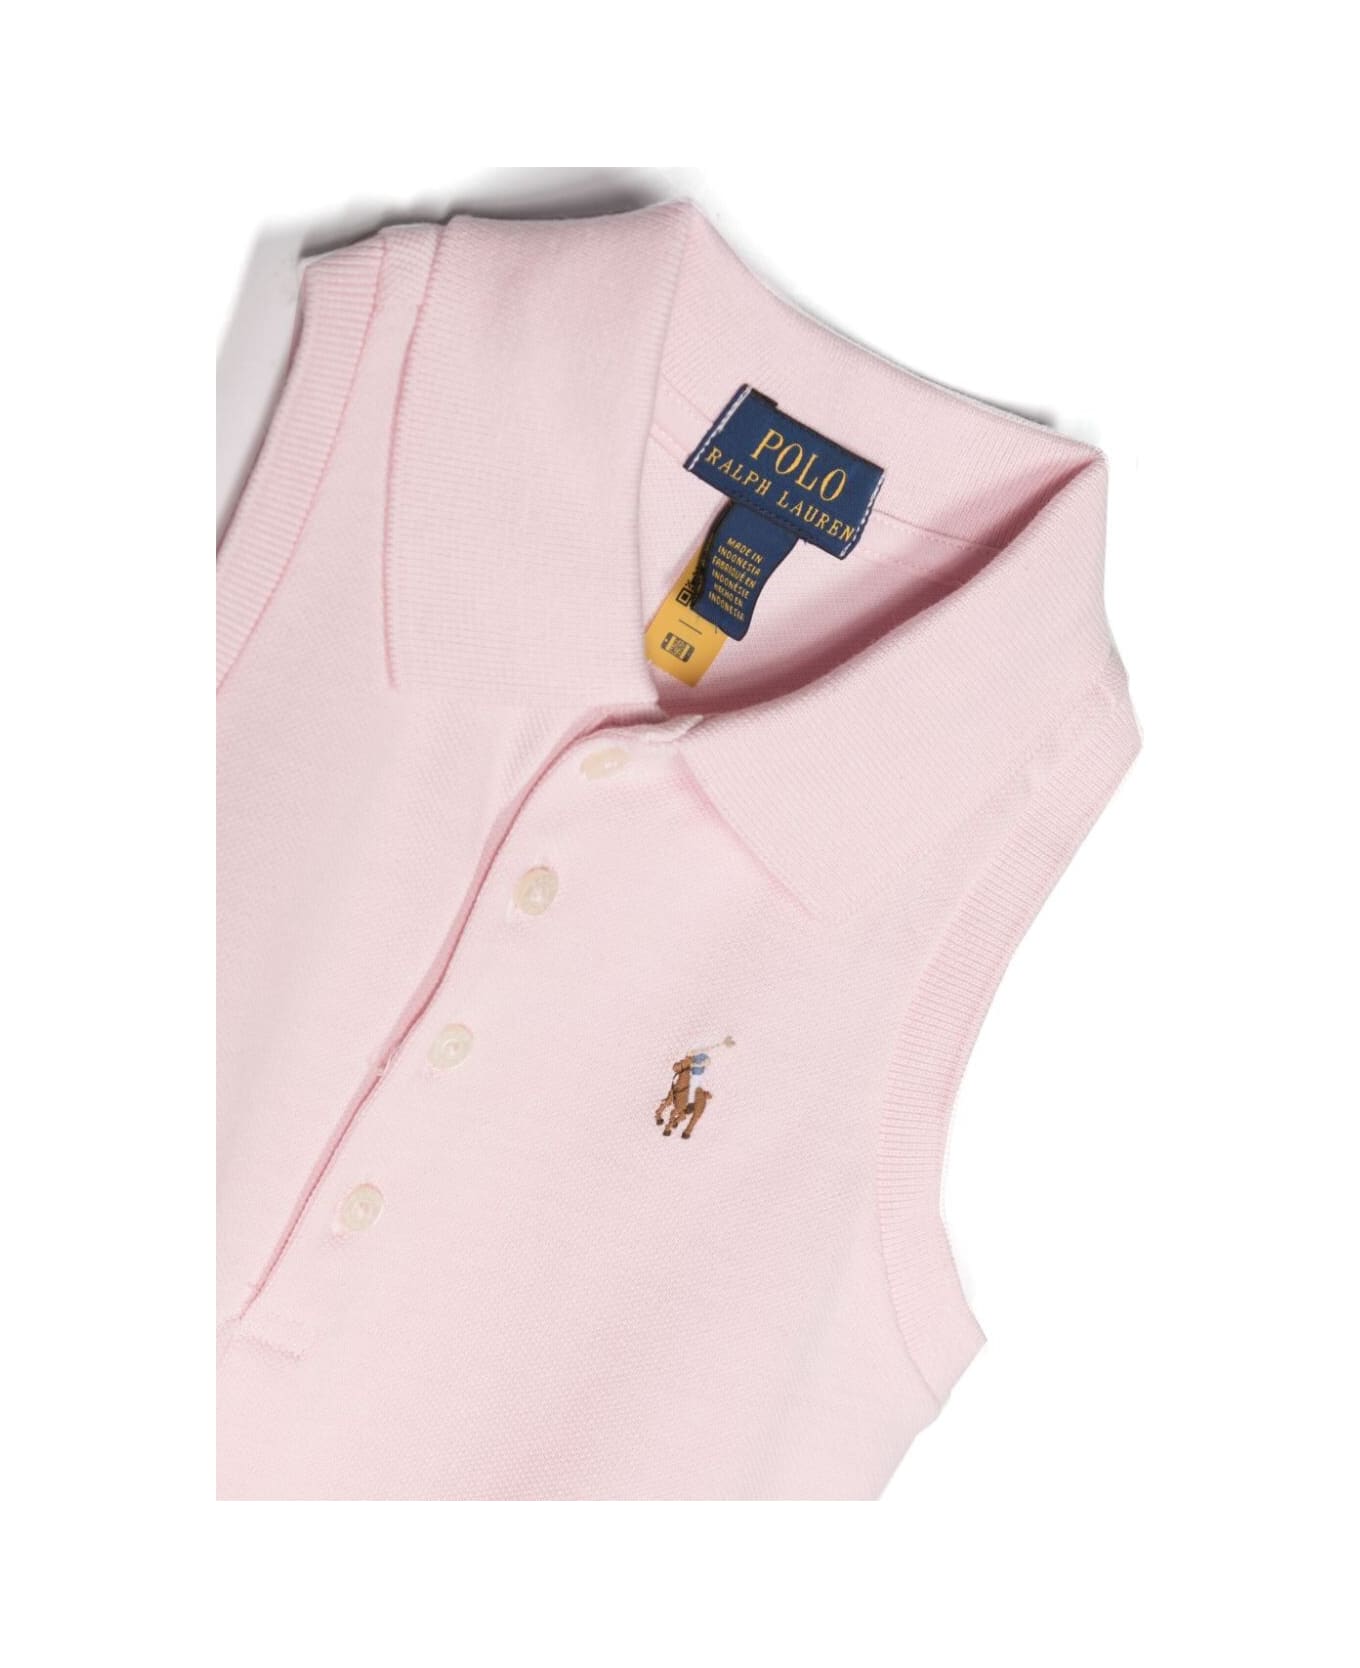 Polo Ralph Lauren Slvlesspolo Knit Shirts Polo Shirt - Hint Of Pink